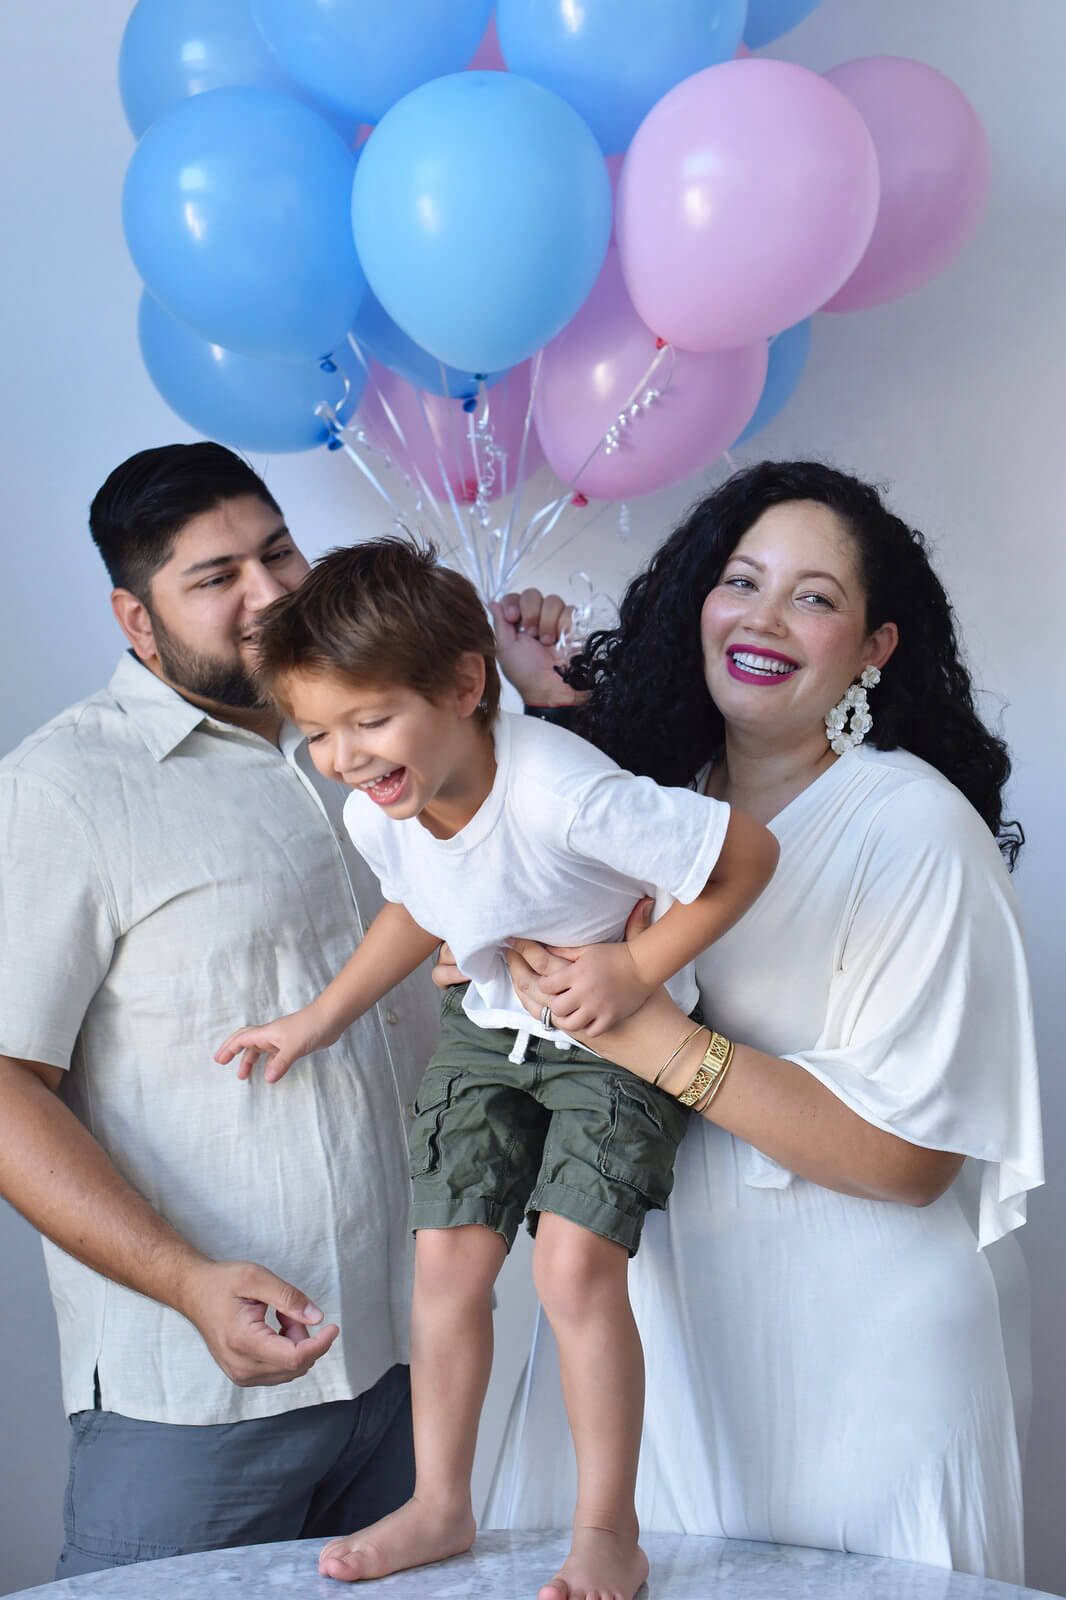 Tanesha awasthi of @GirlWithCurves featuring a gender reveal, and its a...